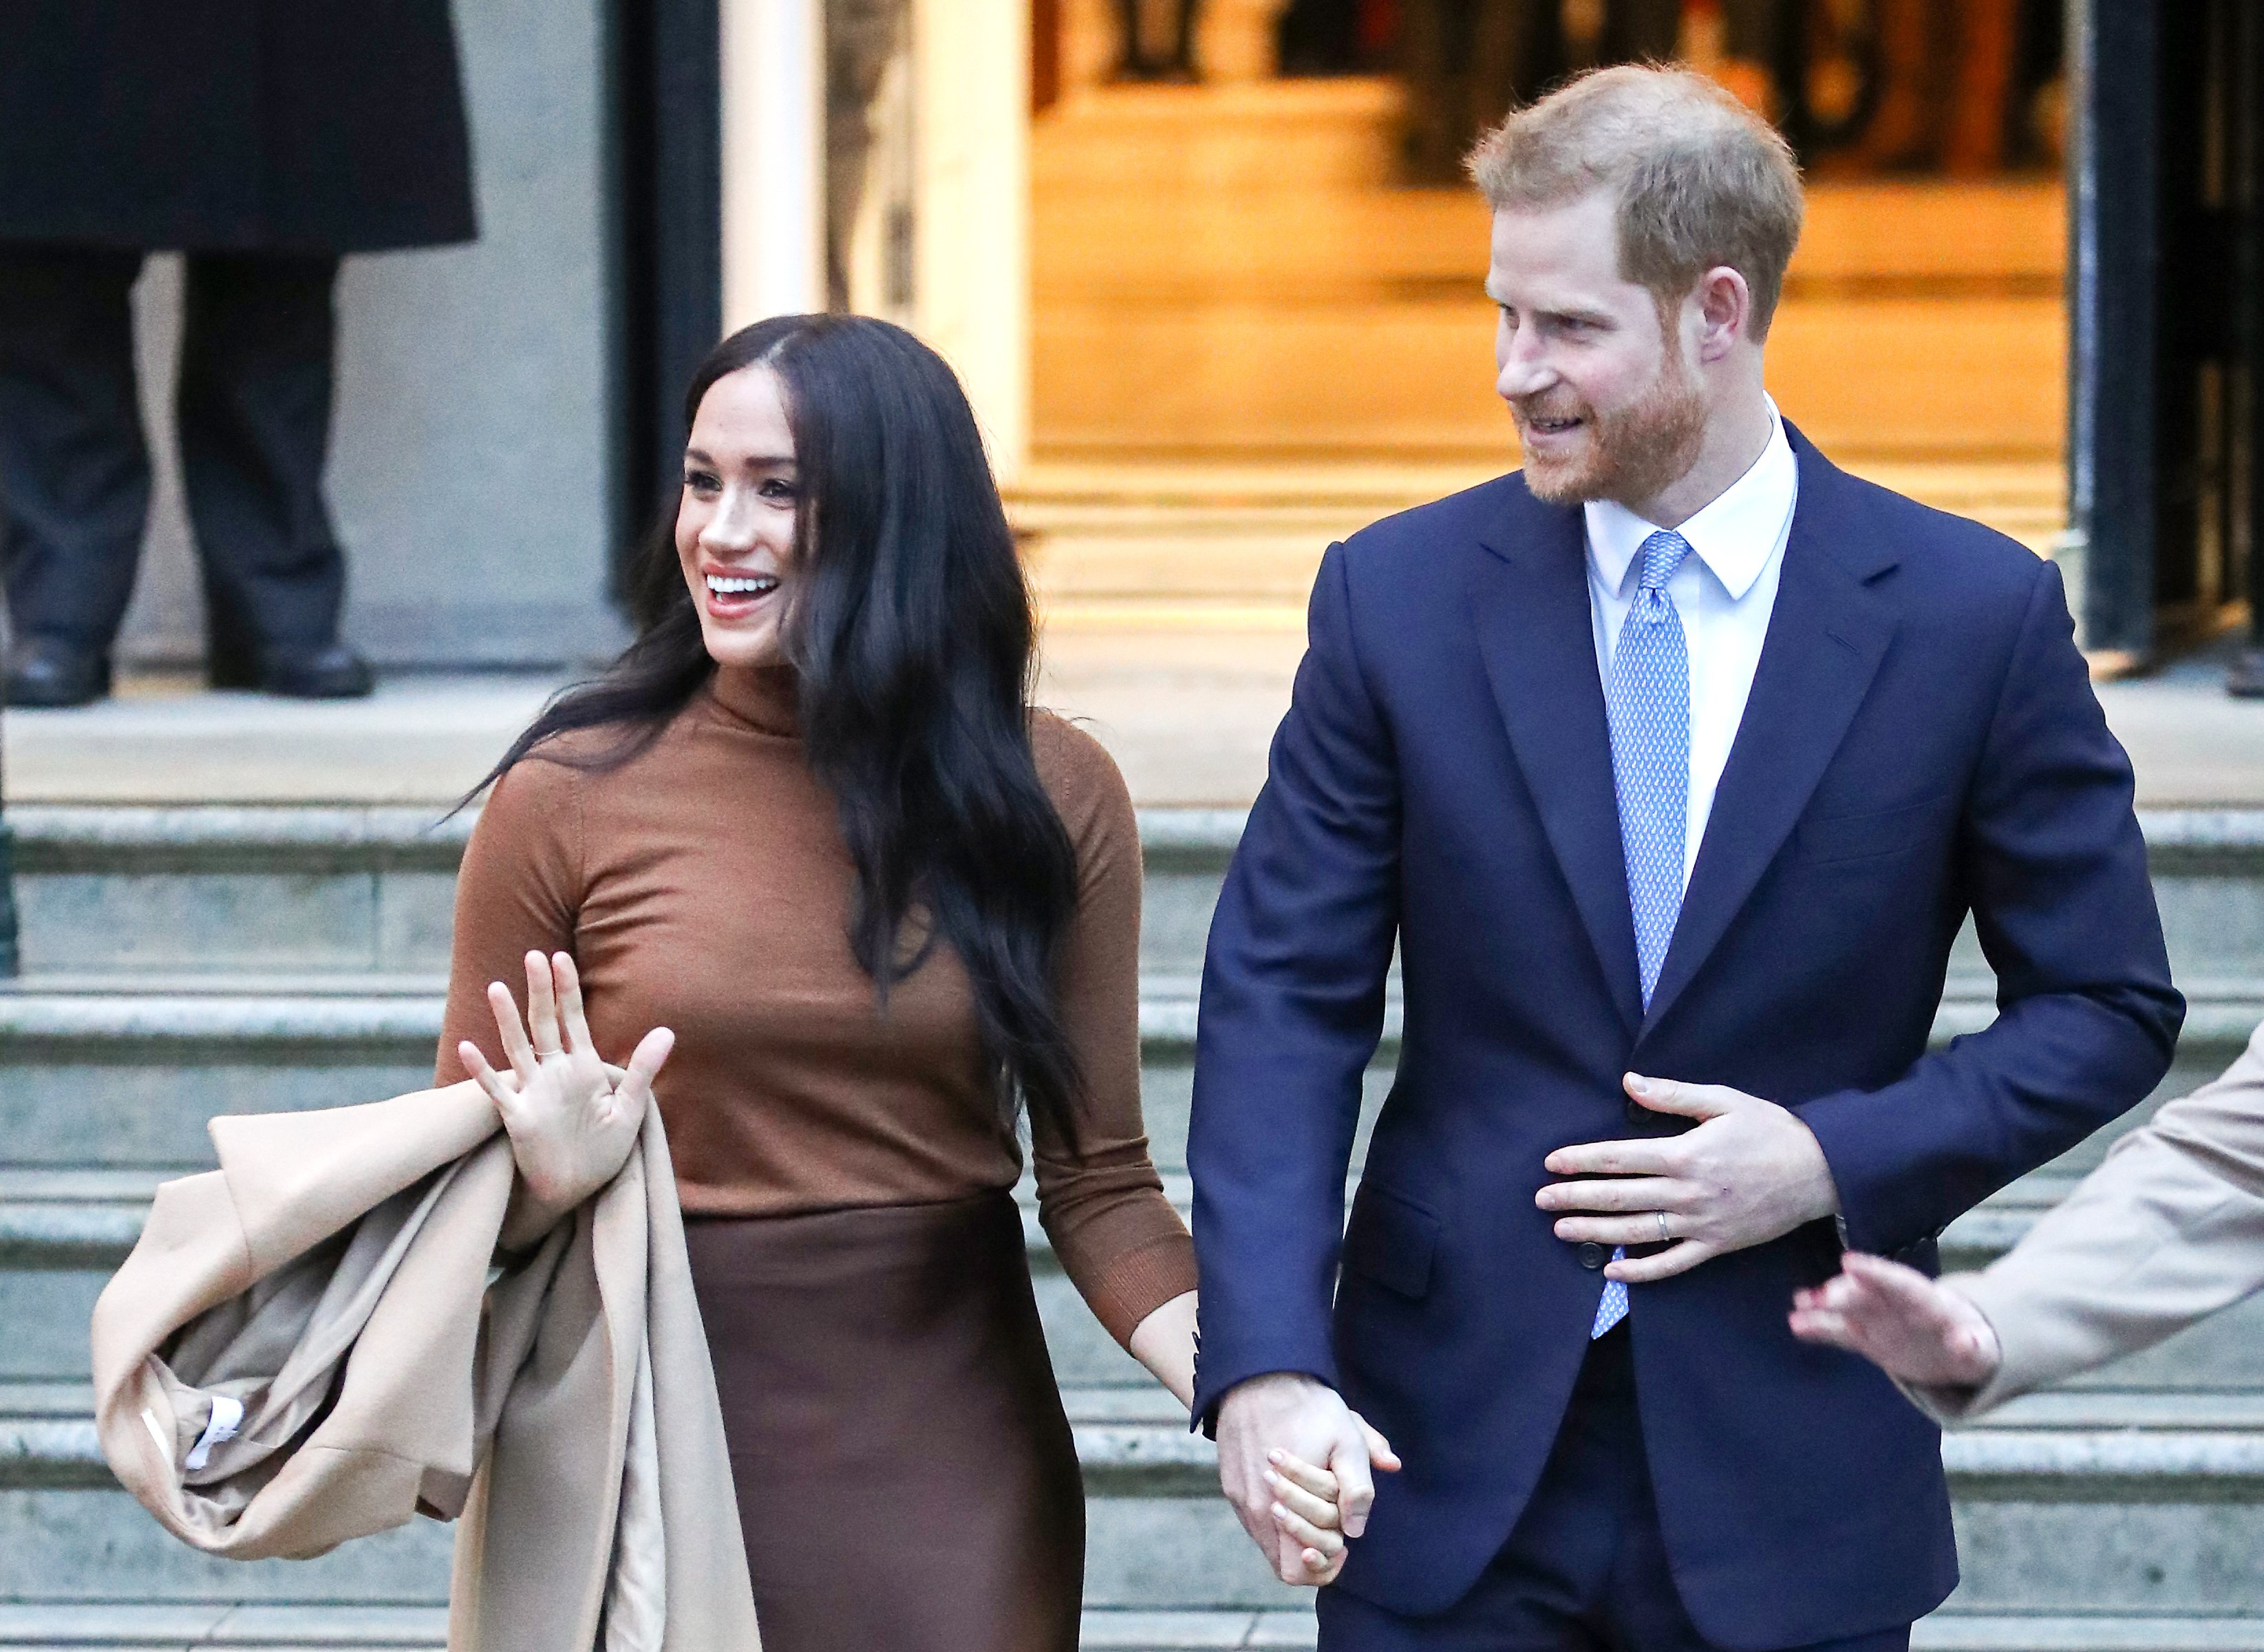 Prince Harry and Meghan Markle depart Canada House on January 07, 2020, in London, England. | Source: Getty Images